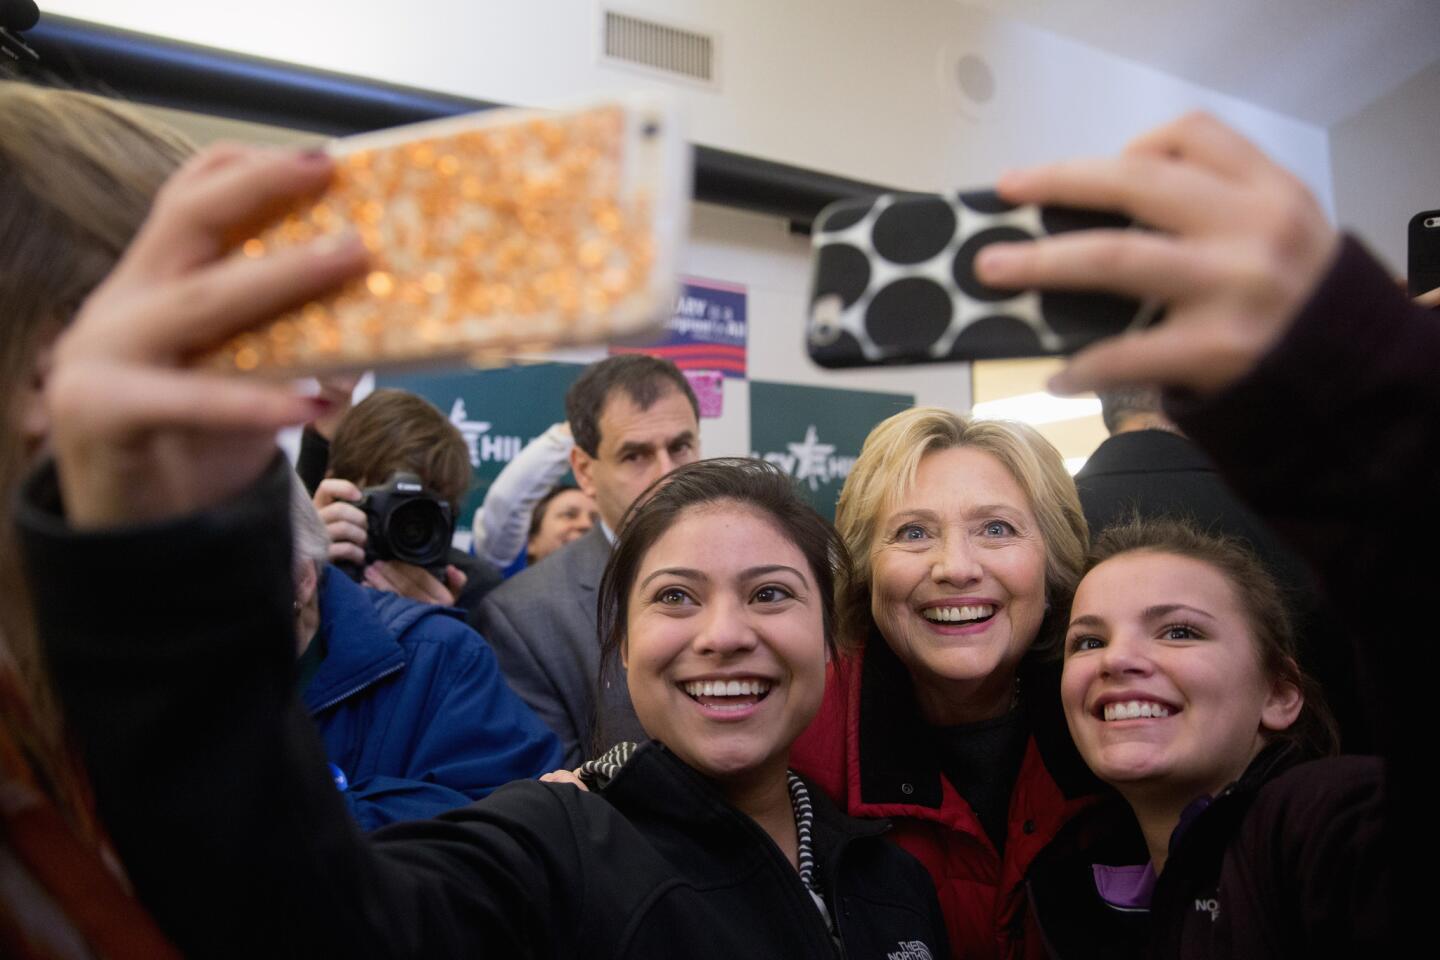 Selfies with Hillary Clinton